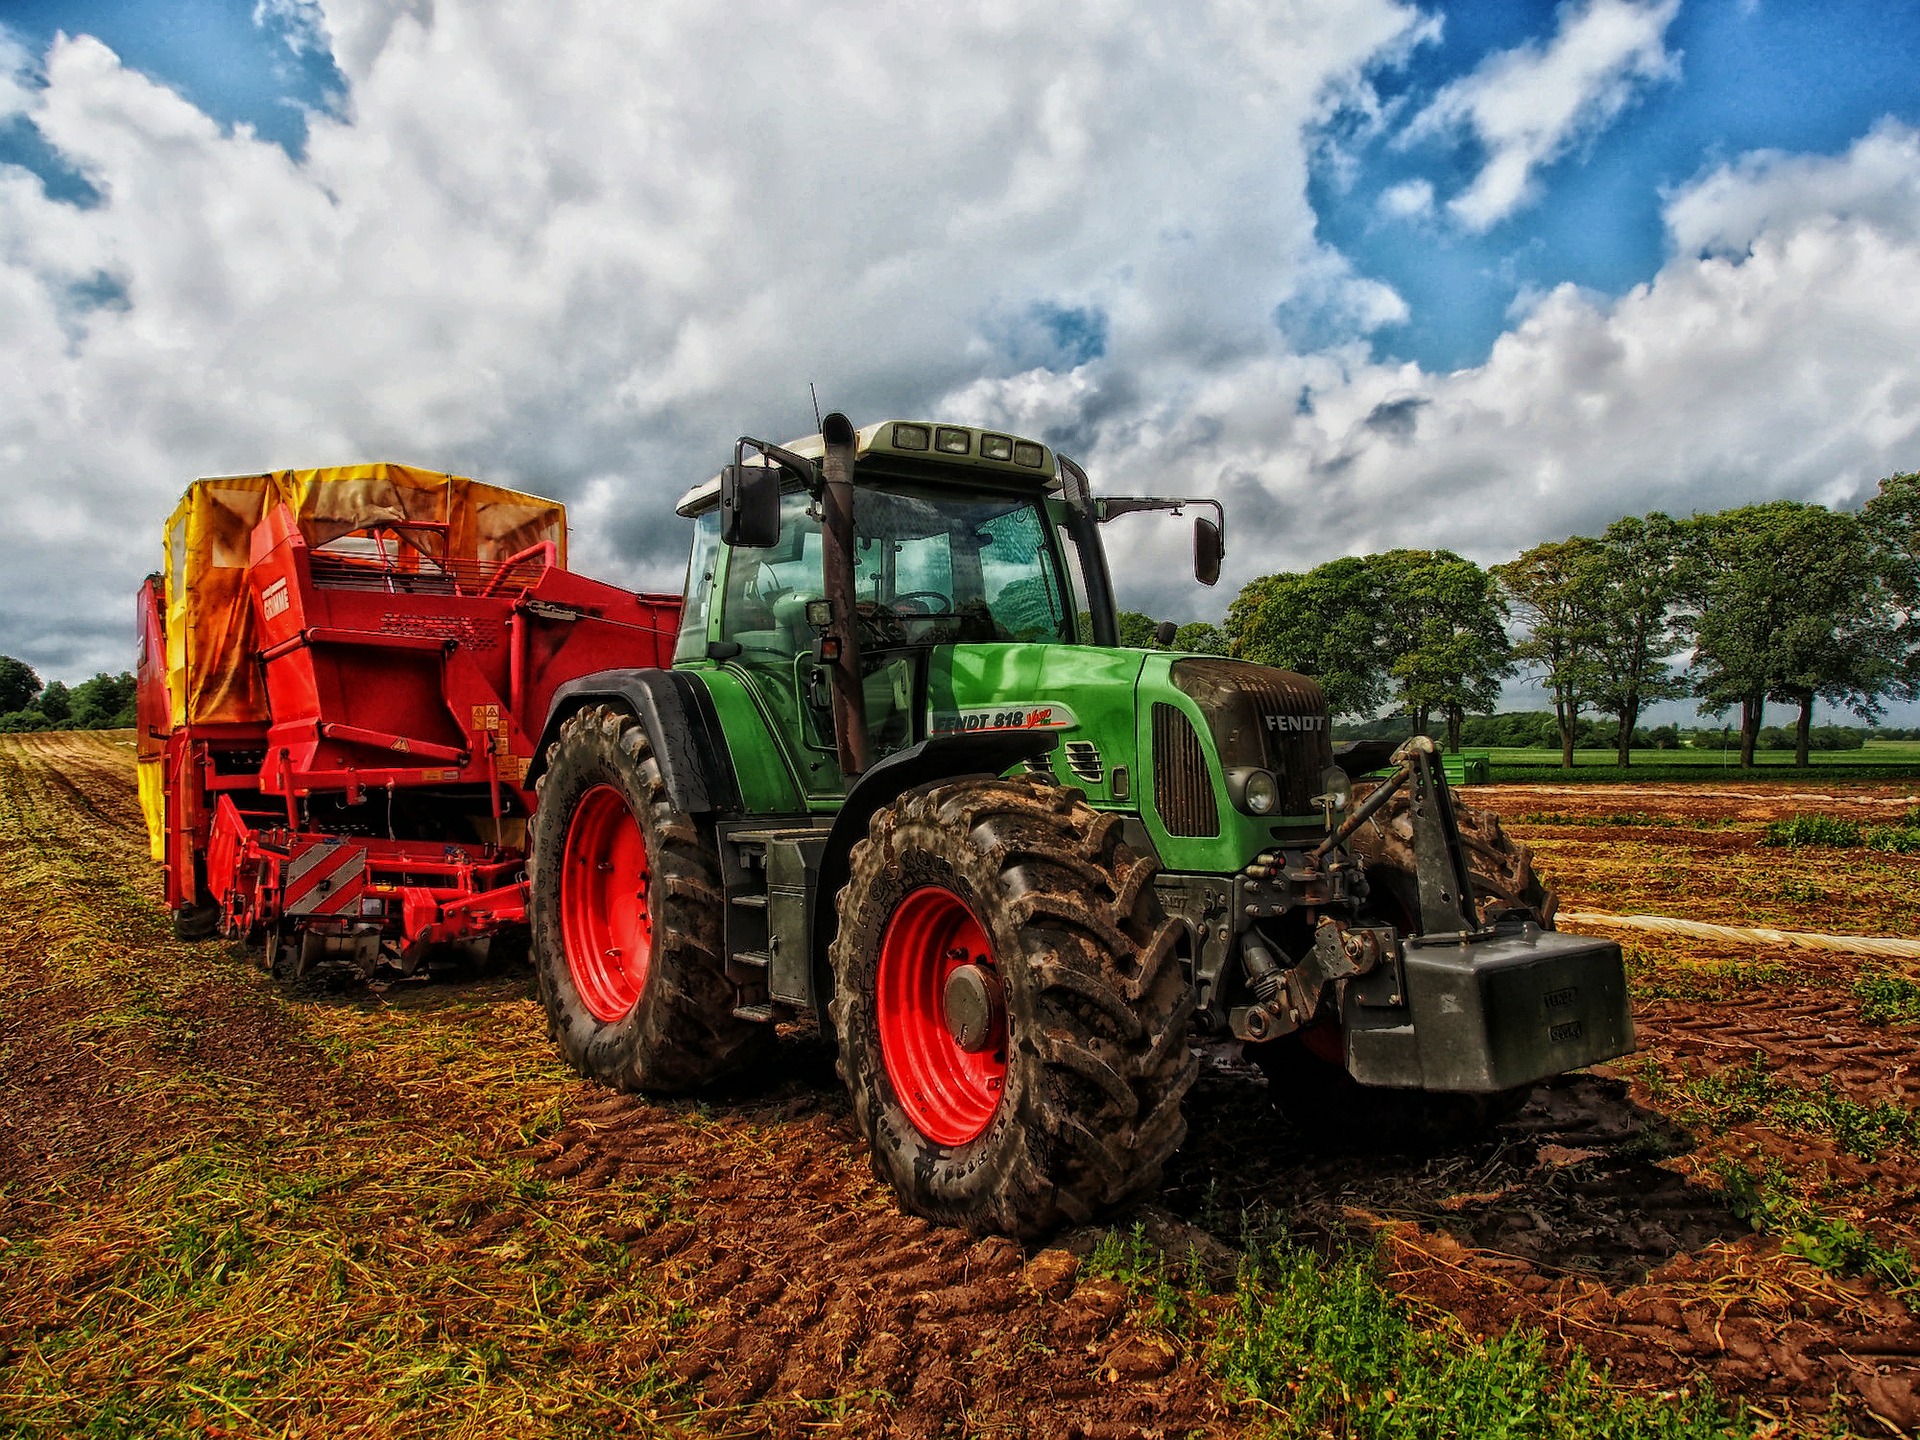 Tractor in a field showing farmer harvesting